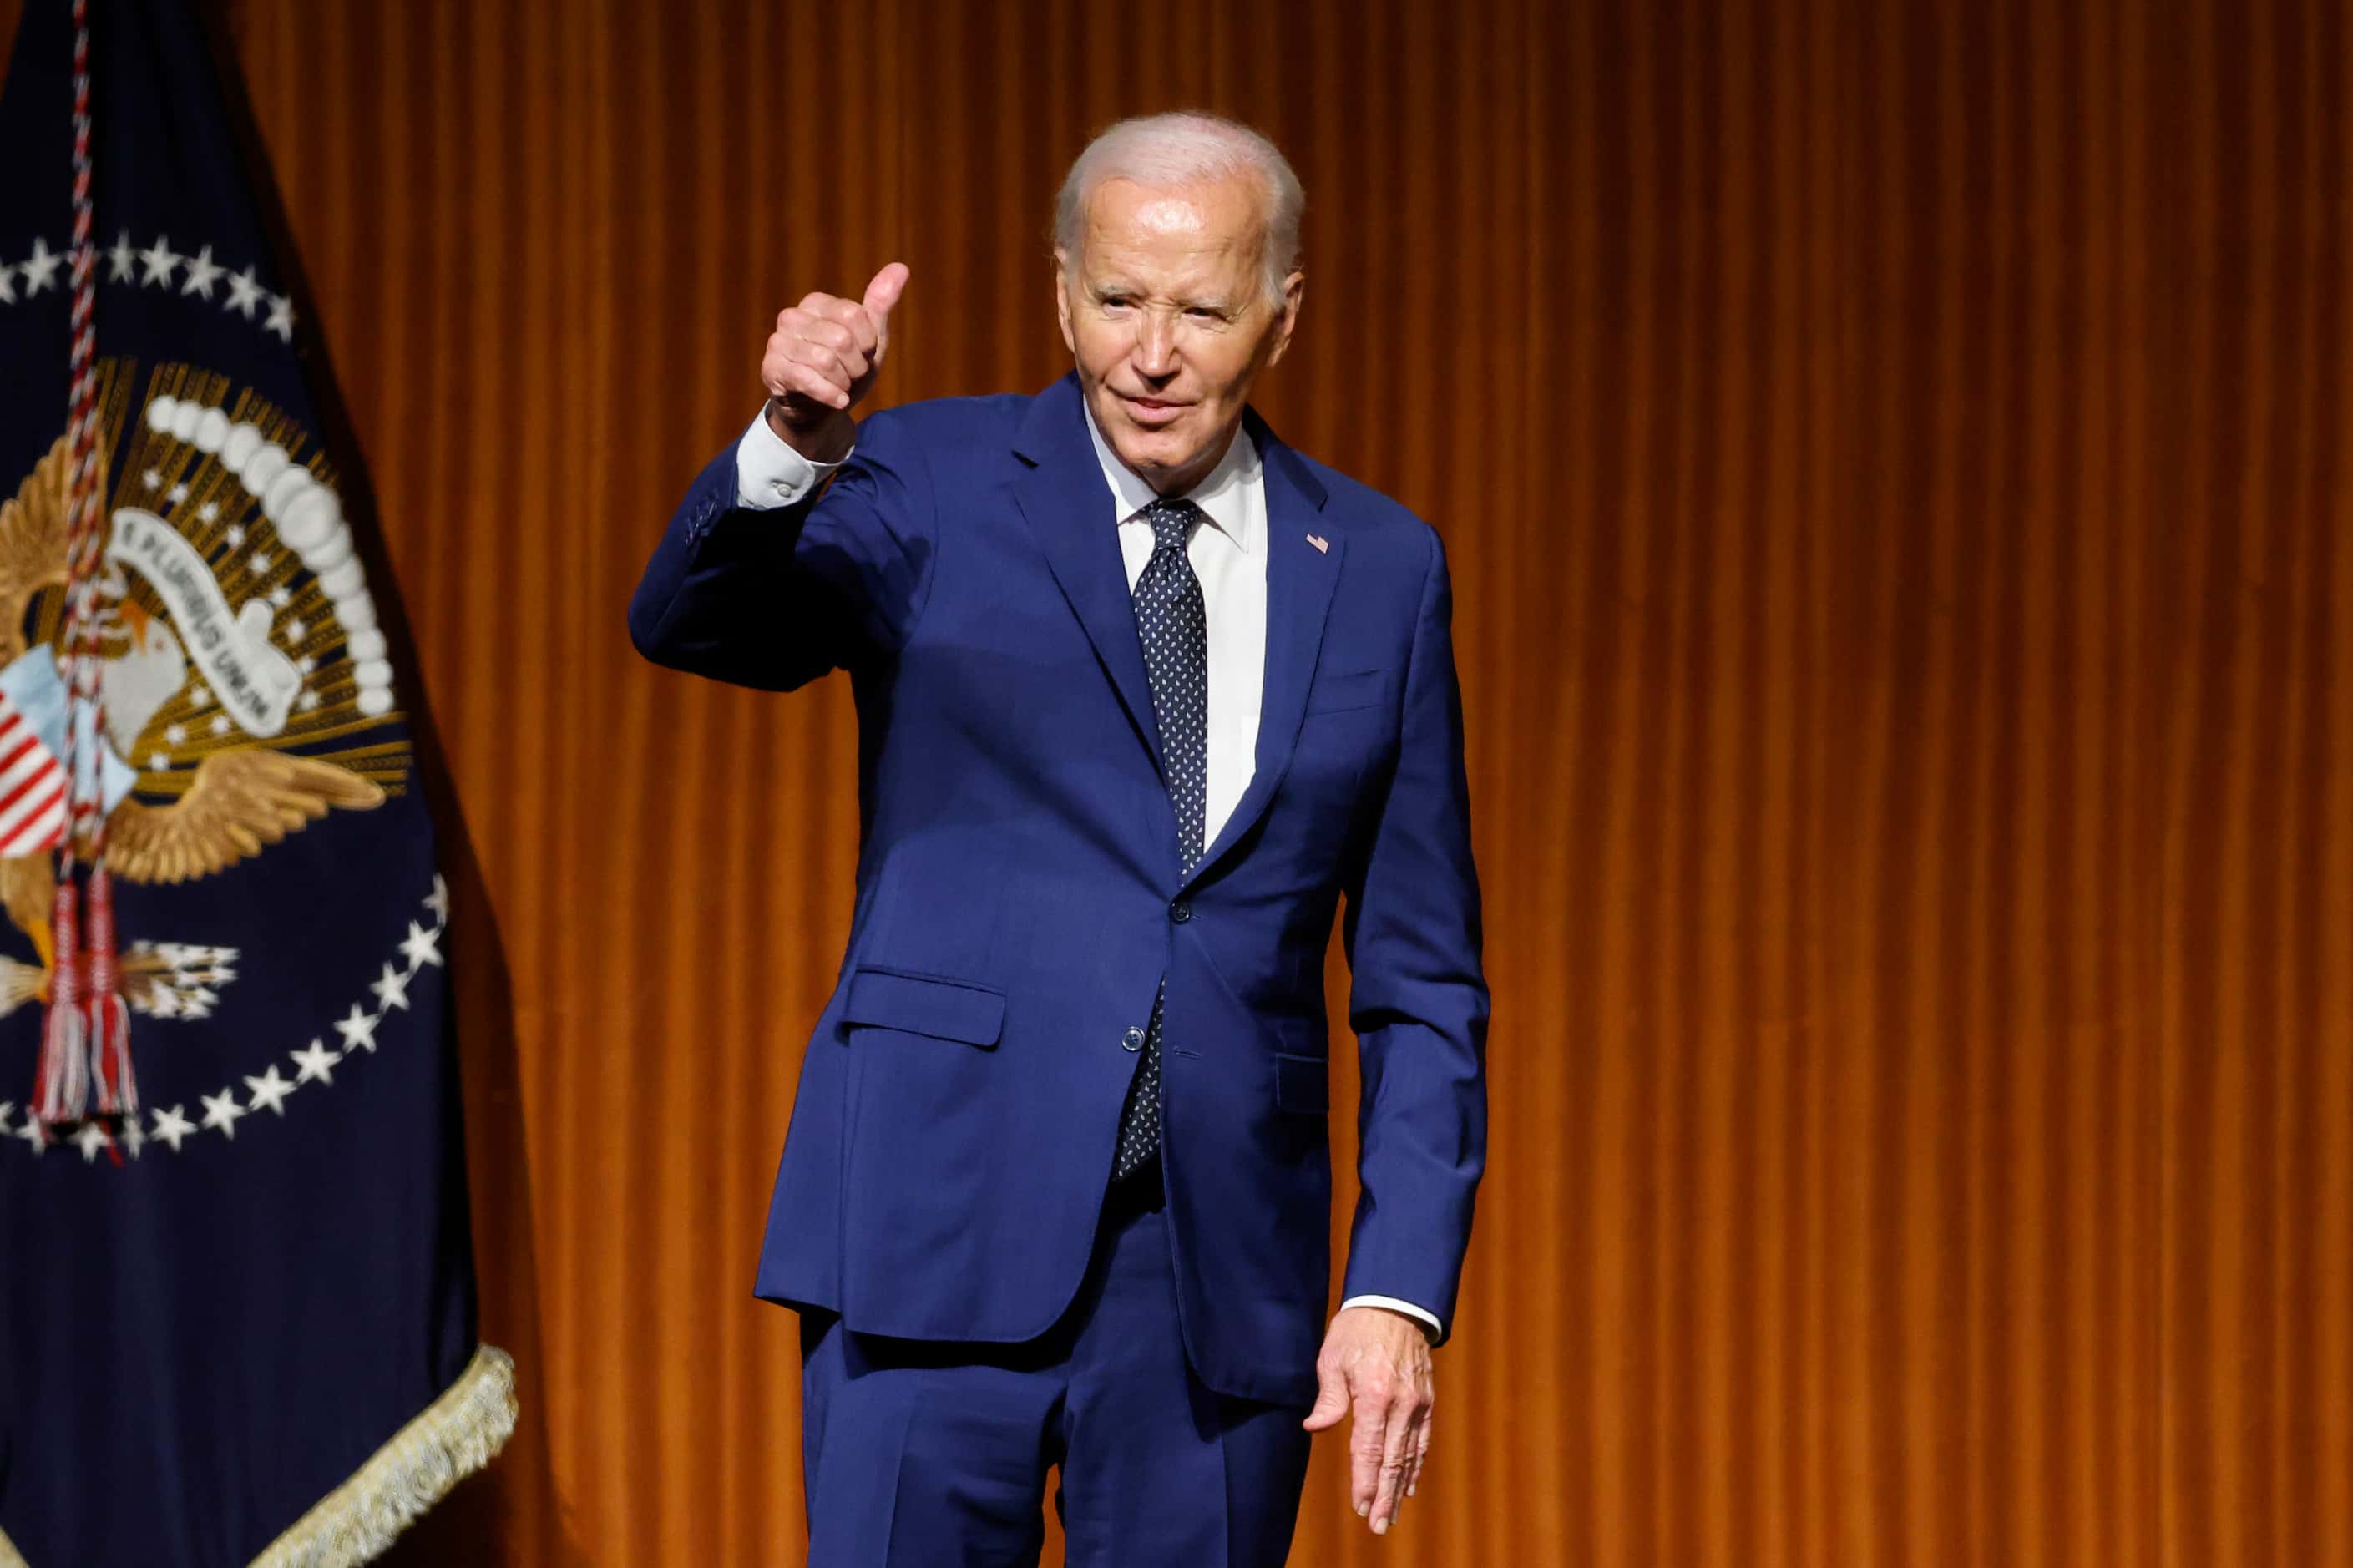 President Joe Biden gives a thumbs up after his speech during an event commemorating the...